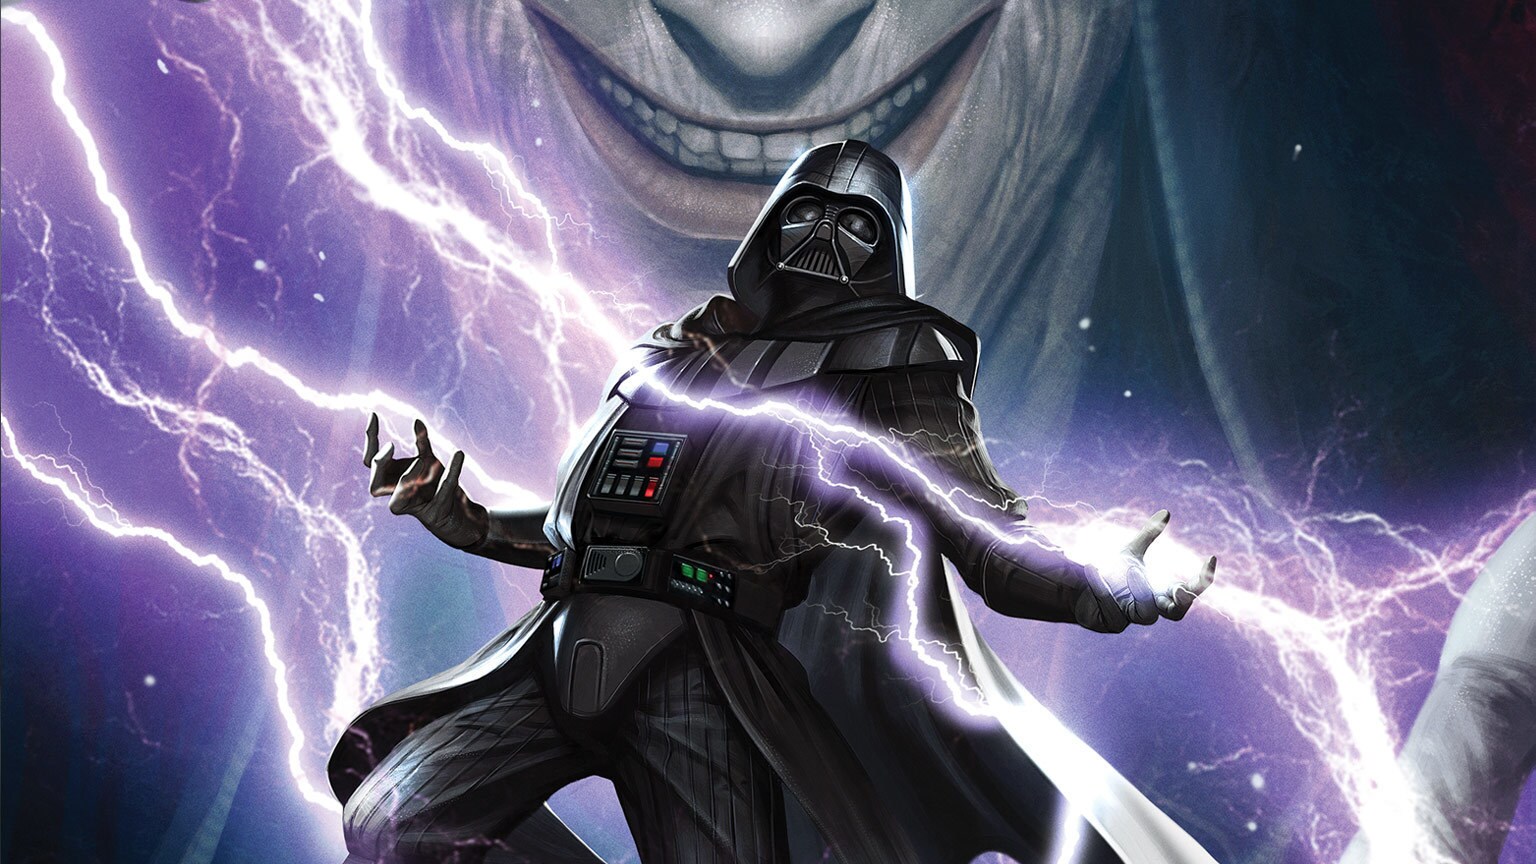 The Emperor’s Wrath Awakens in Marvel’s Darth Vader #6 - Exclusive Preview